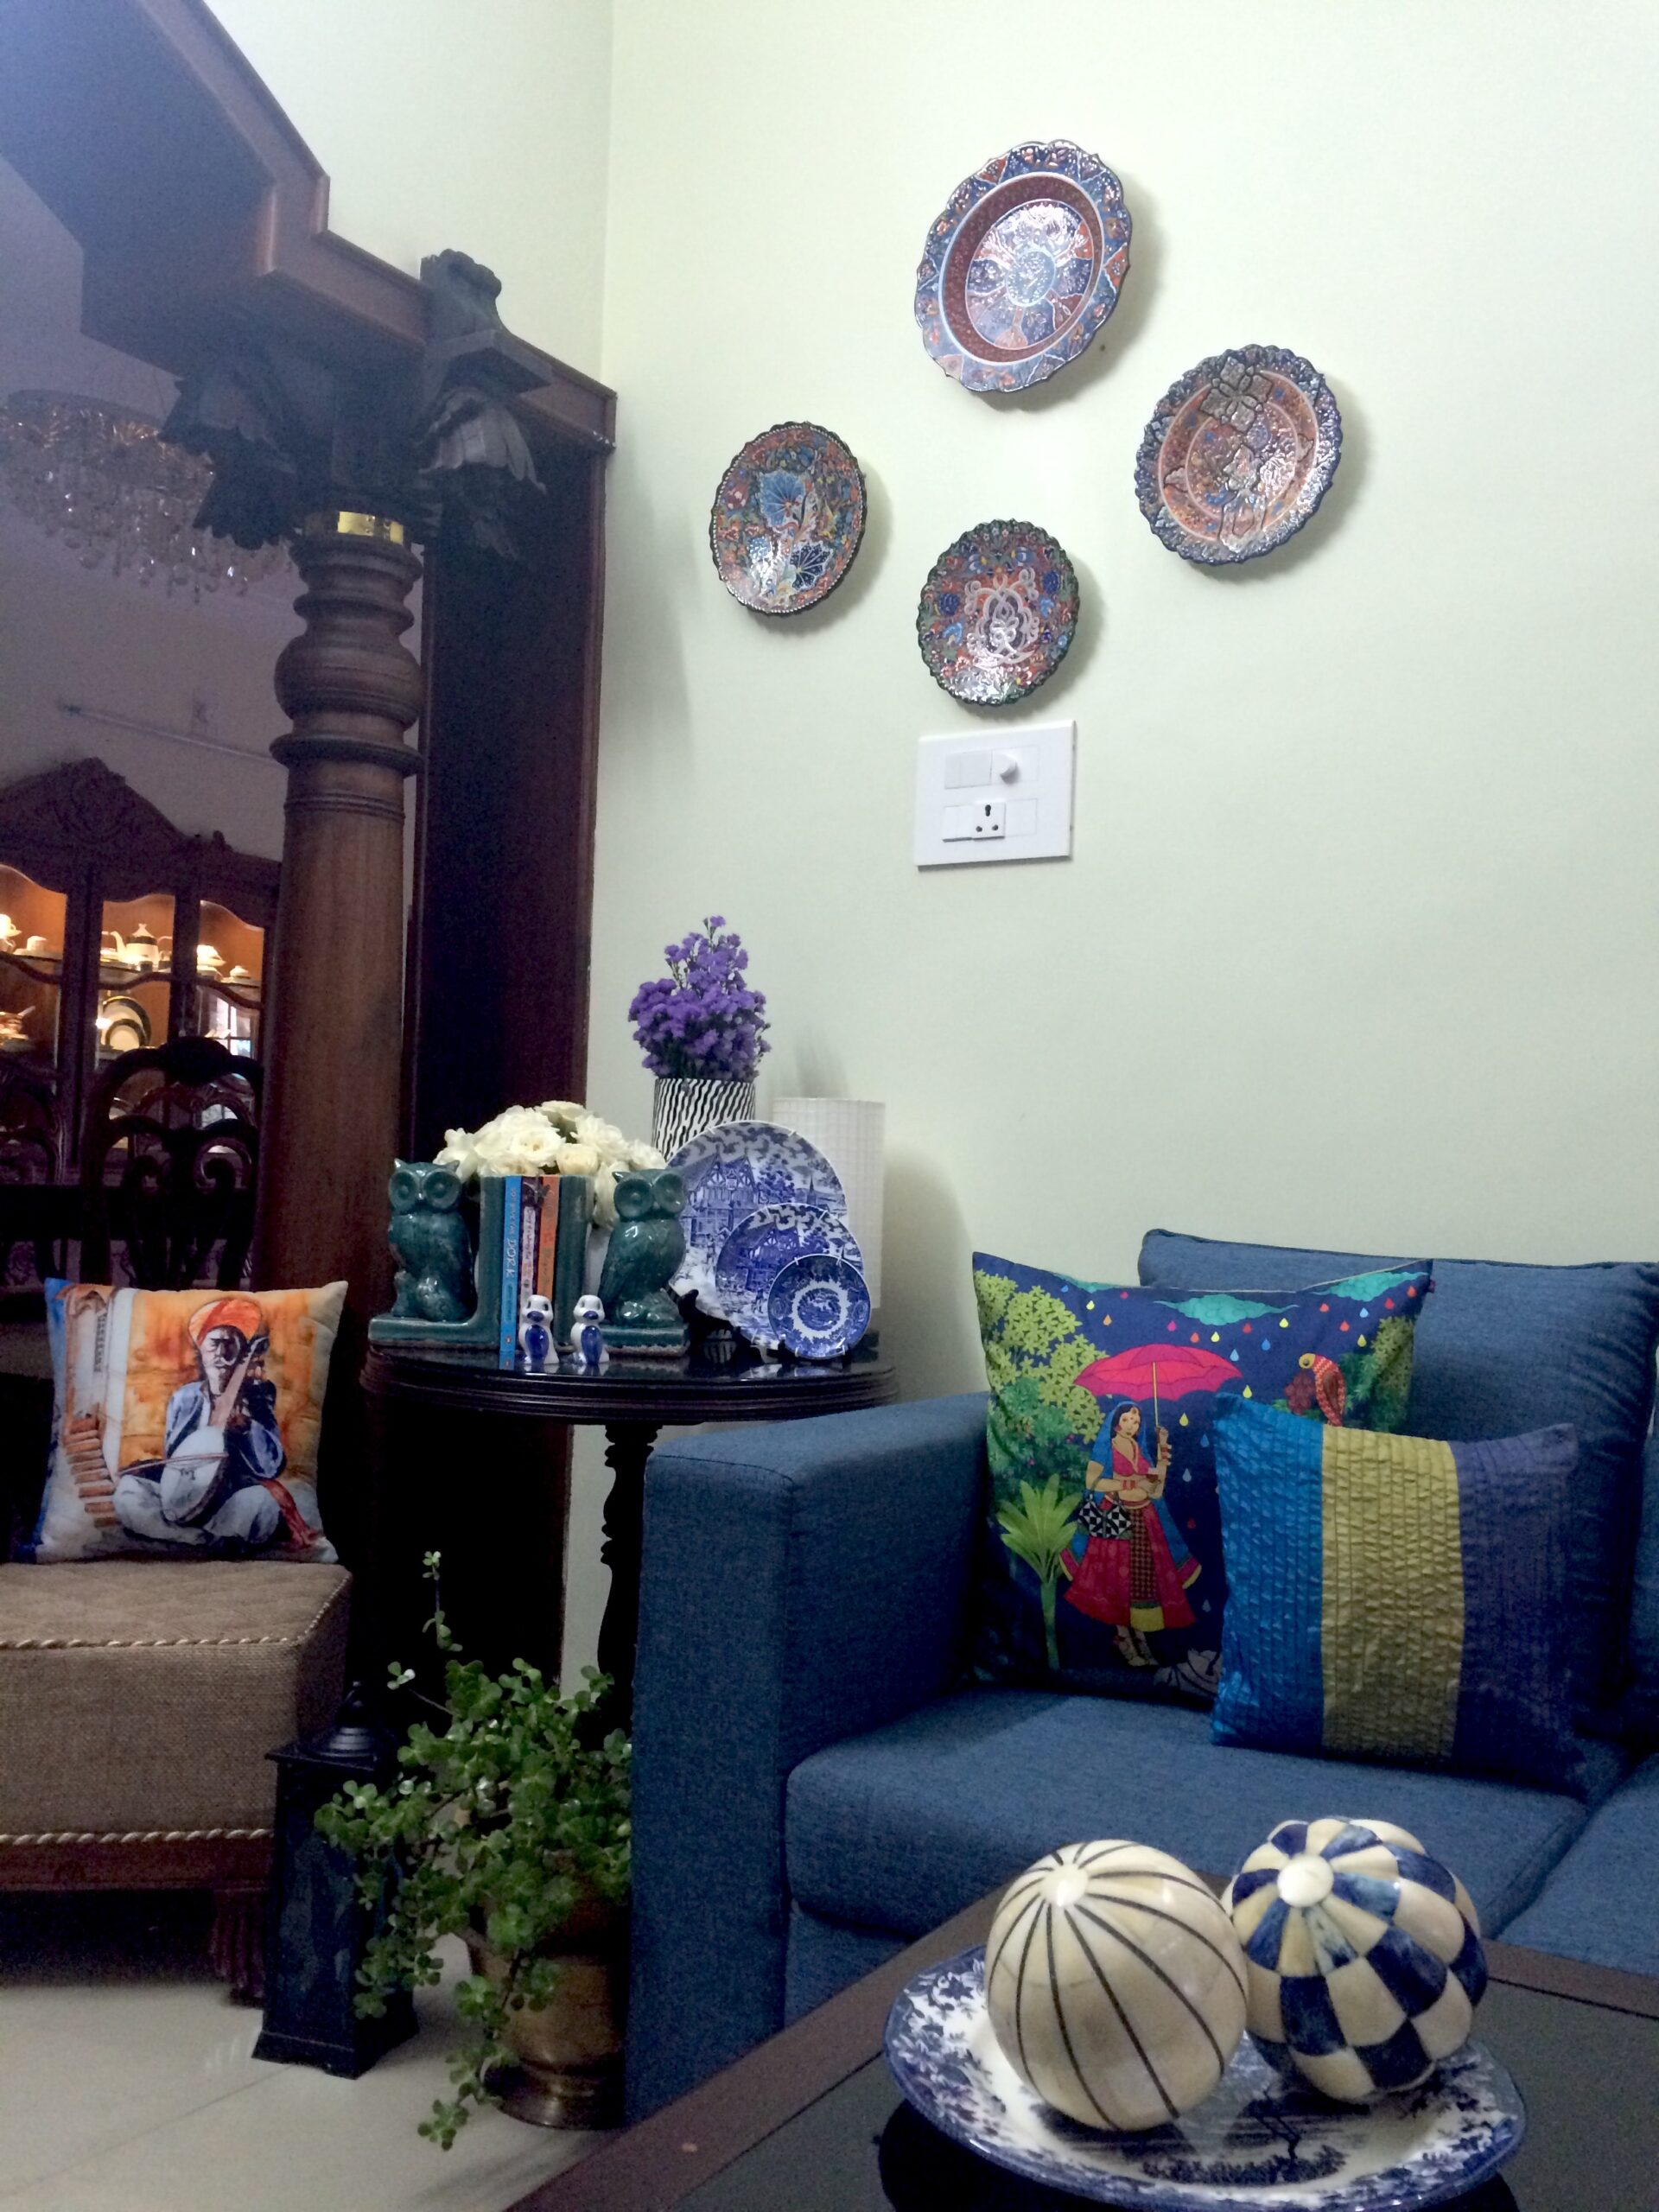 The blue room is decorated with blue wall plates, lanterns, blue sofa, green plants, cushion covers and antique wooden pillars | Joseph home tour